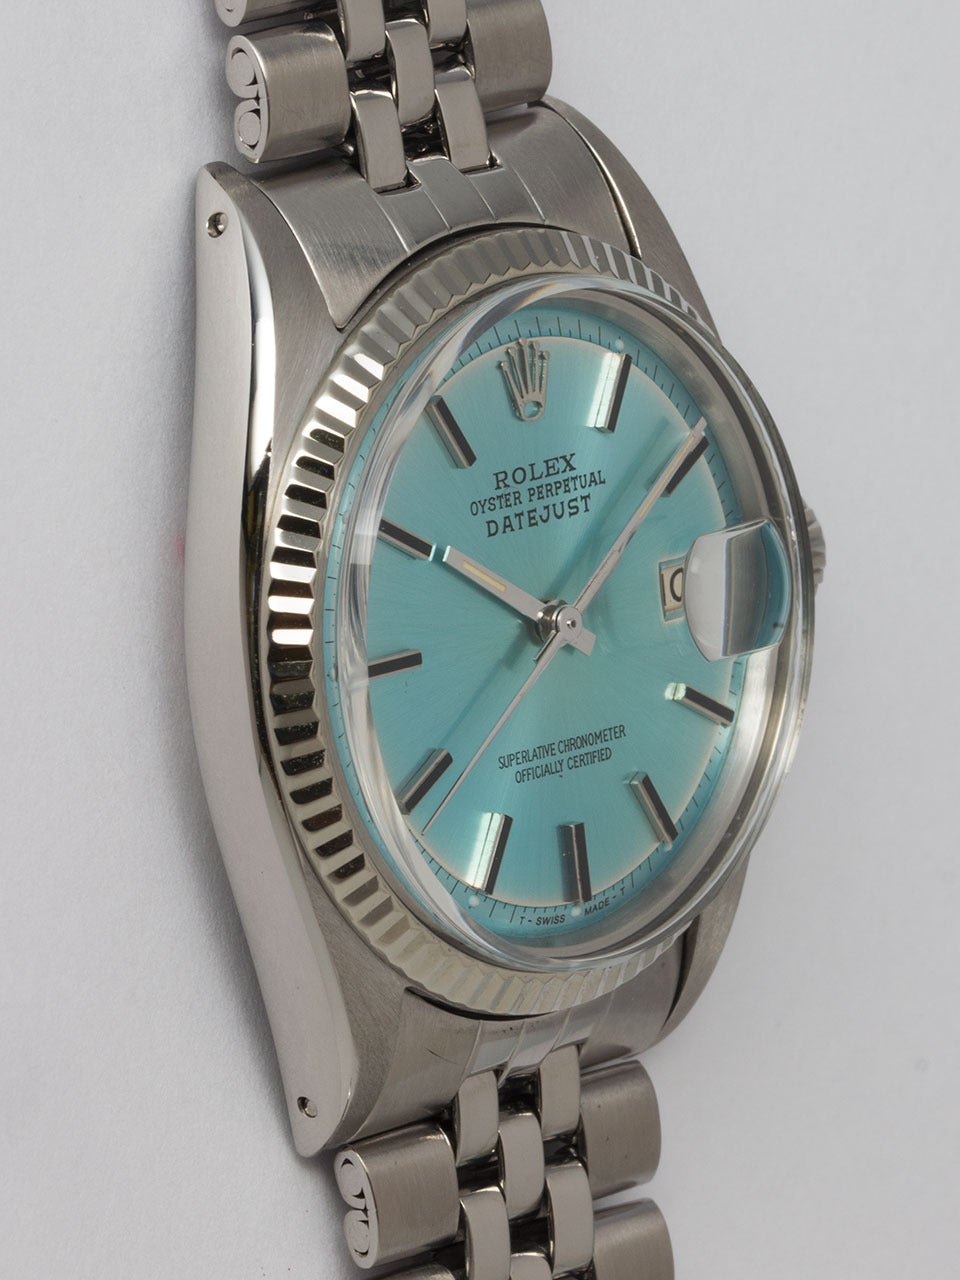 Rolex Stainless Steel Datejust Wristwatch ref 1601 serial #1.4 million circa 1966. 36mm diameter full size man's case with 14K white gold fluted bezel and acrylic crystal. With great looking custom colored Iceberg Blue pie pan dial with applied